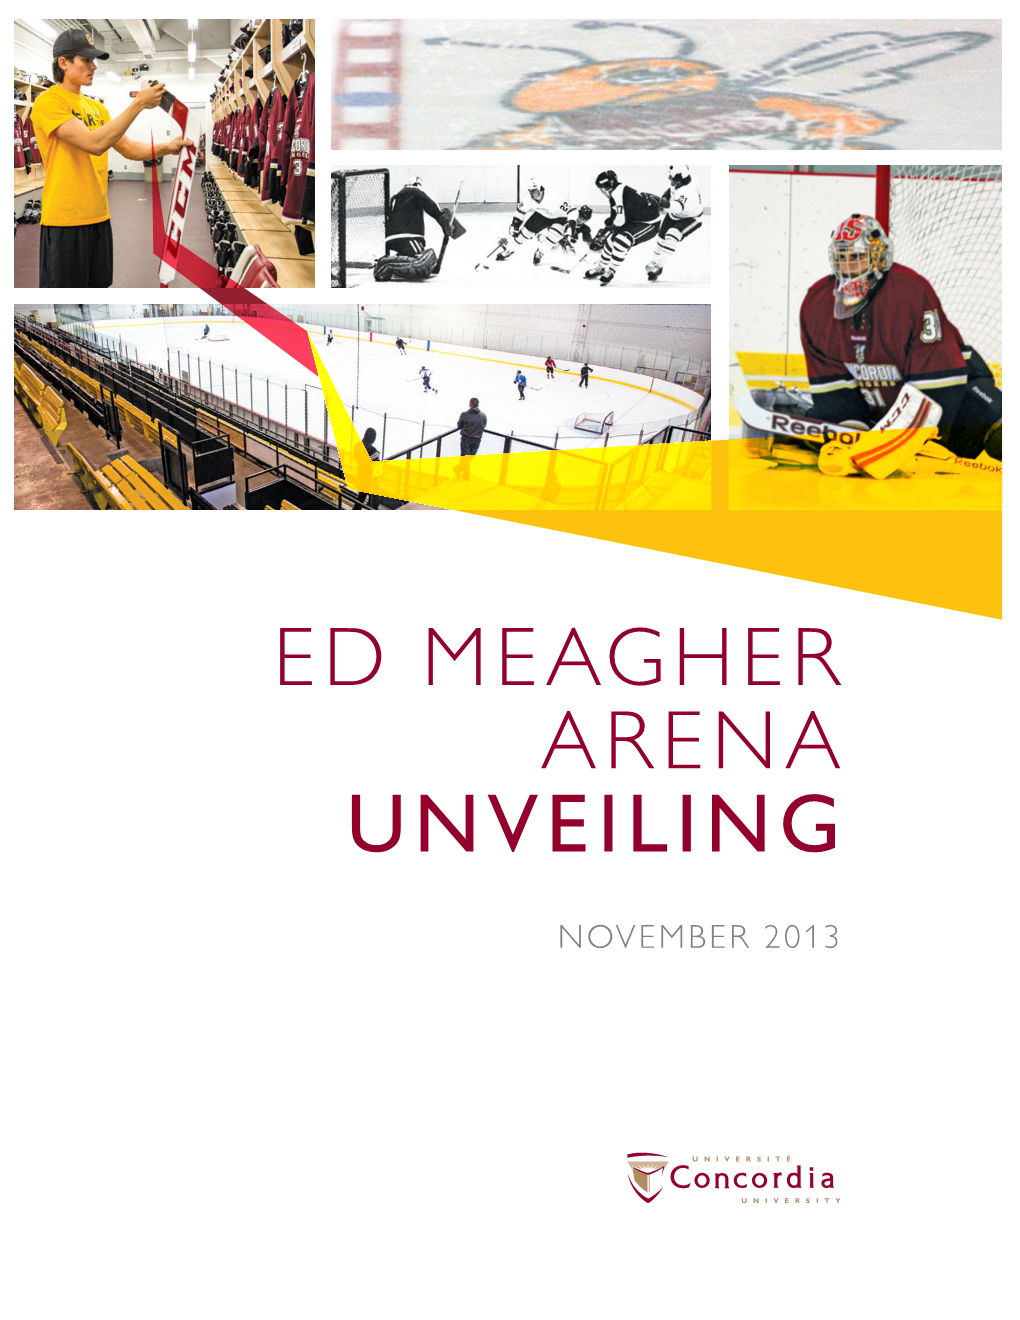 Ed Meagher Arena Unveiling